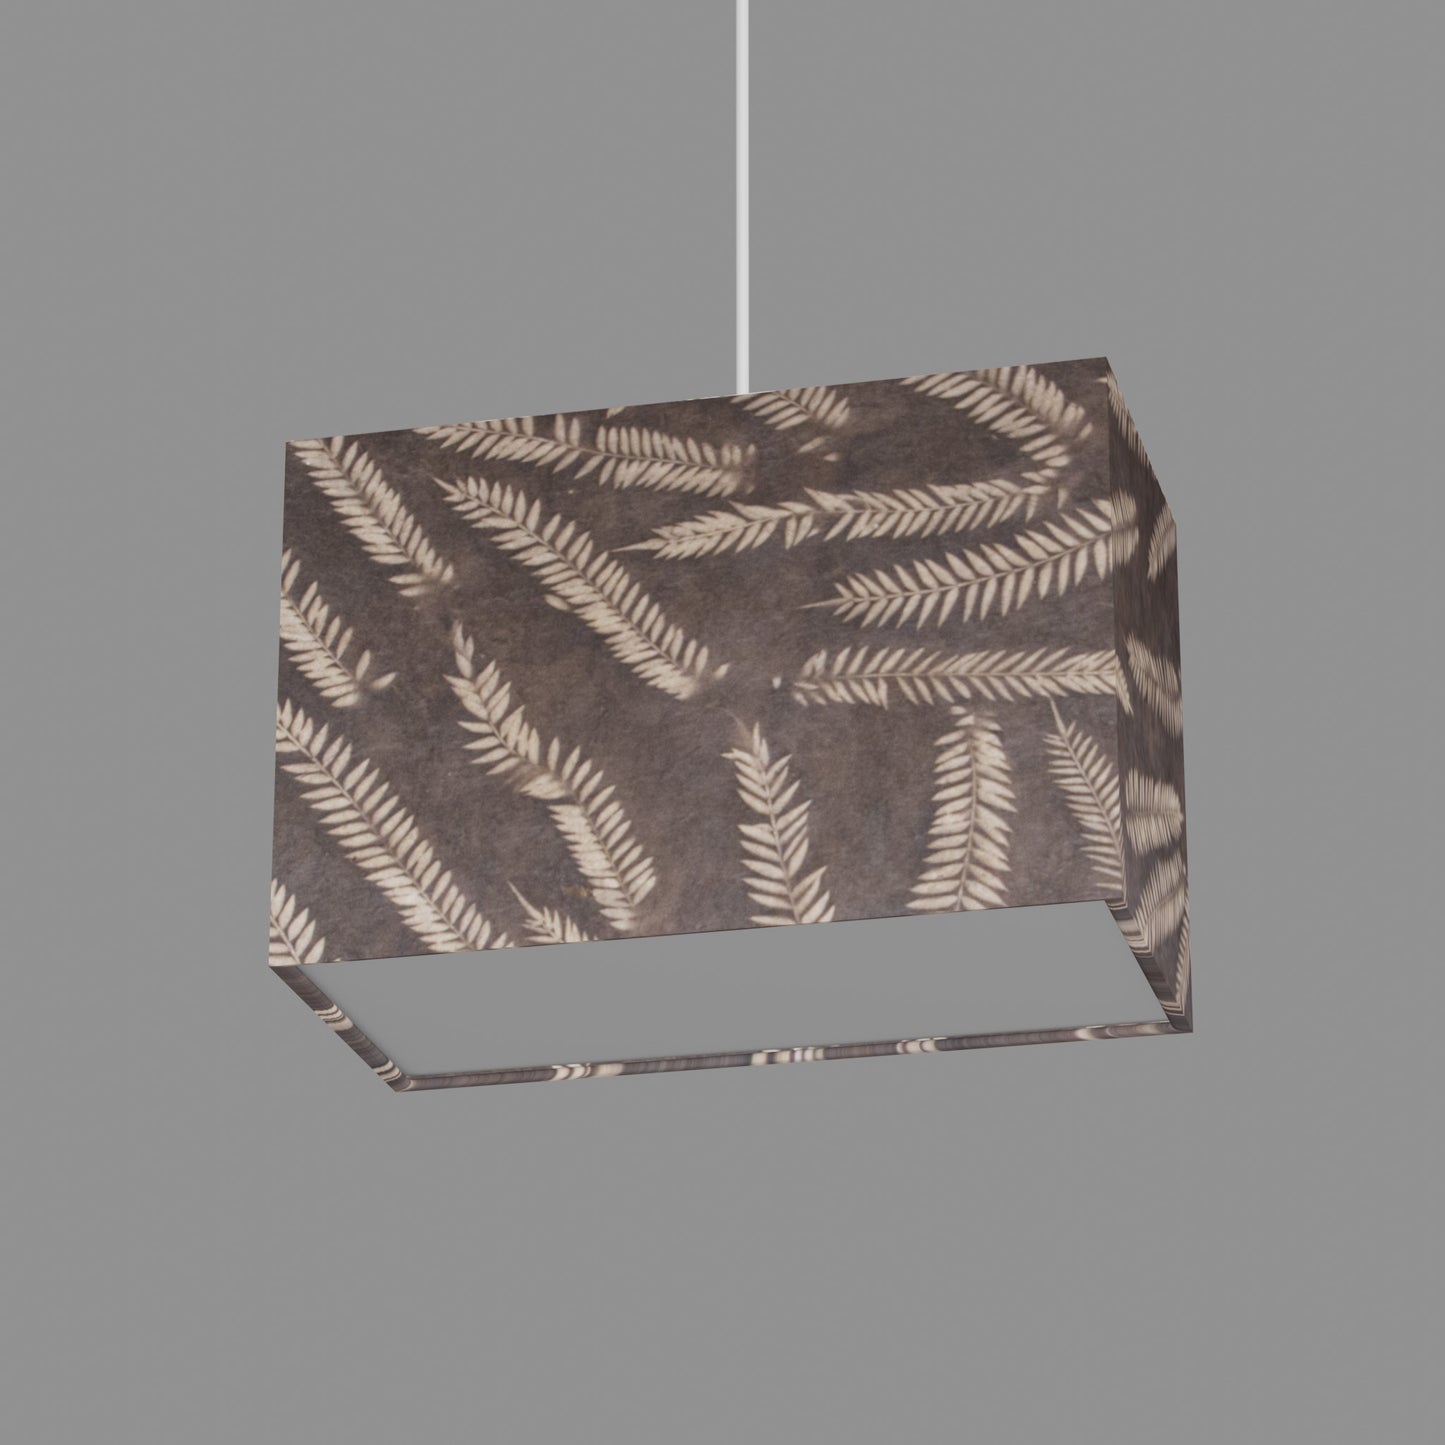 Rectangle Lamp Shade - P26 - Resistance Dyed Brown Fern, 30cm(w) x 20cm(h) x 15cm(d)